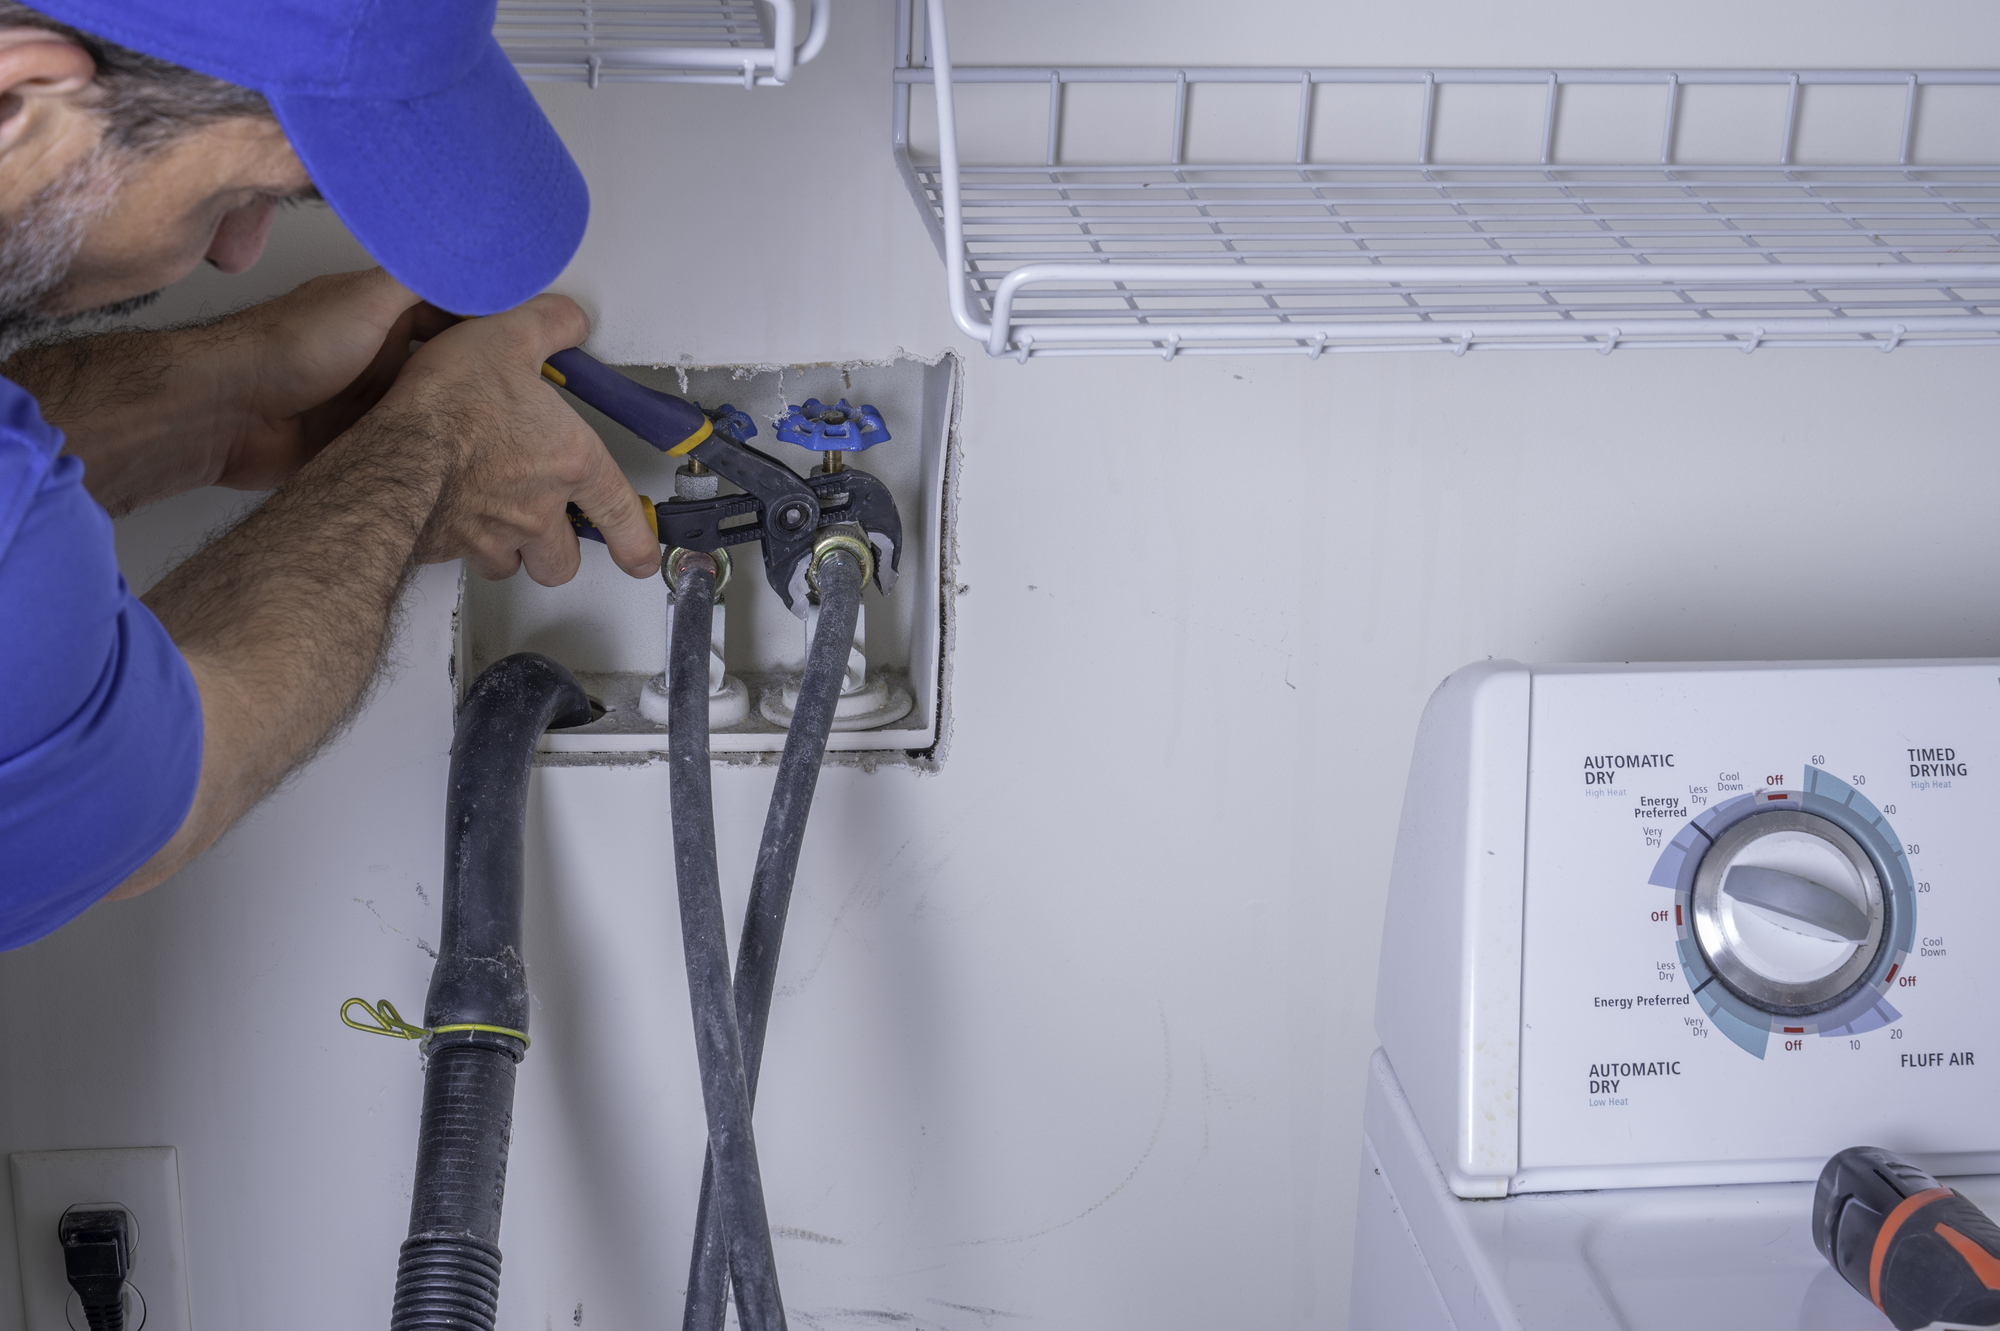 The New Age of Plumbing: Trends, Services and Technological Advancements You Should Know